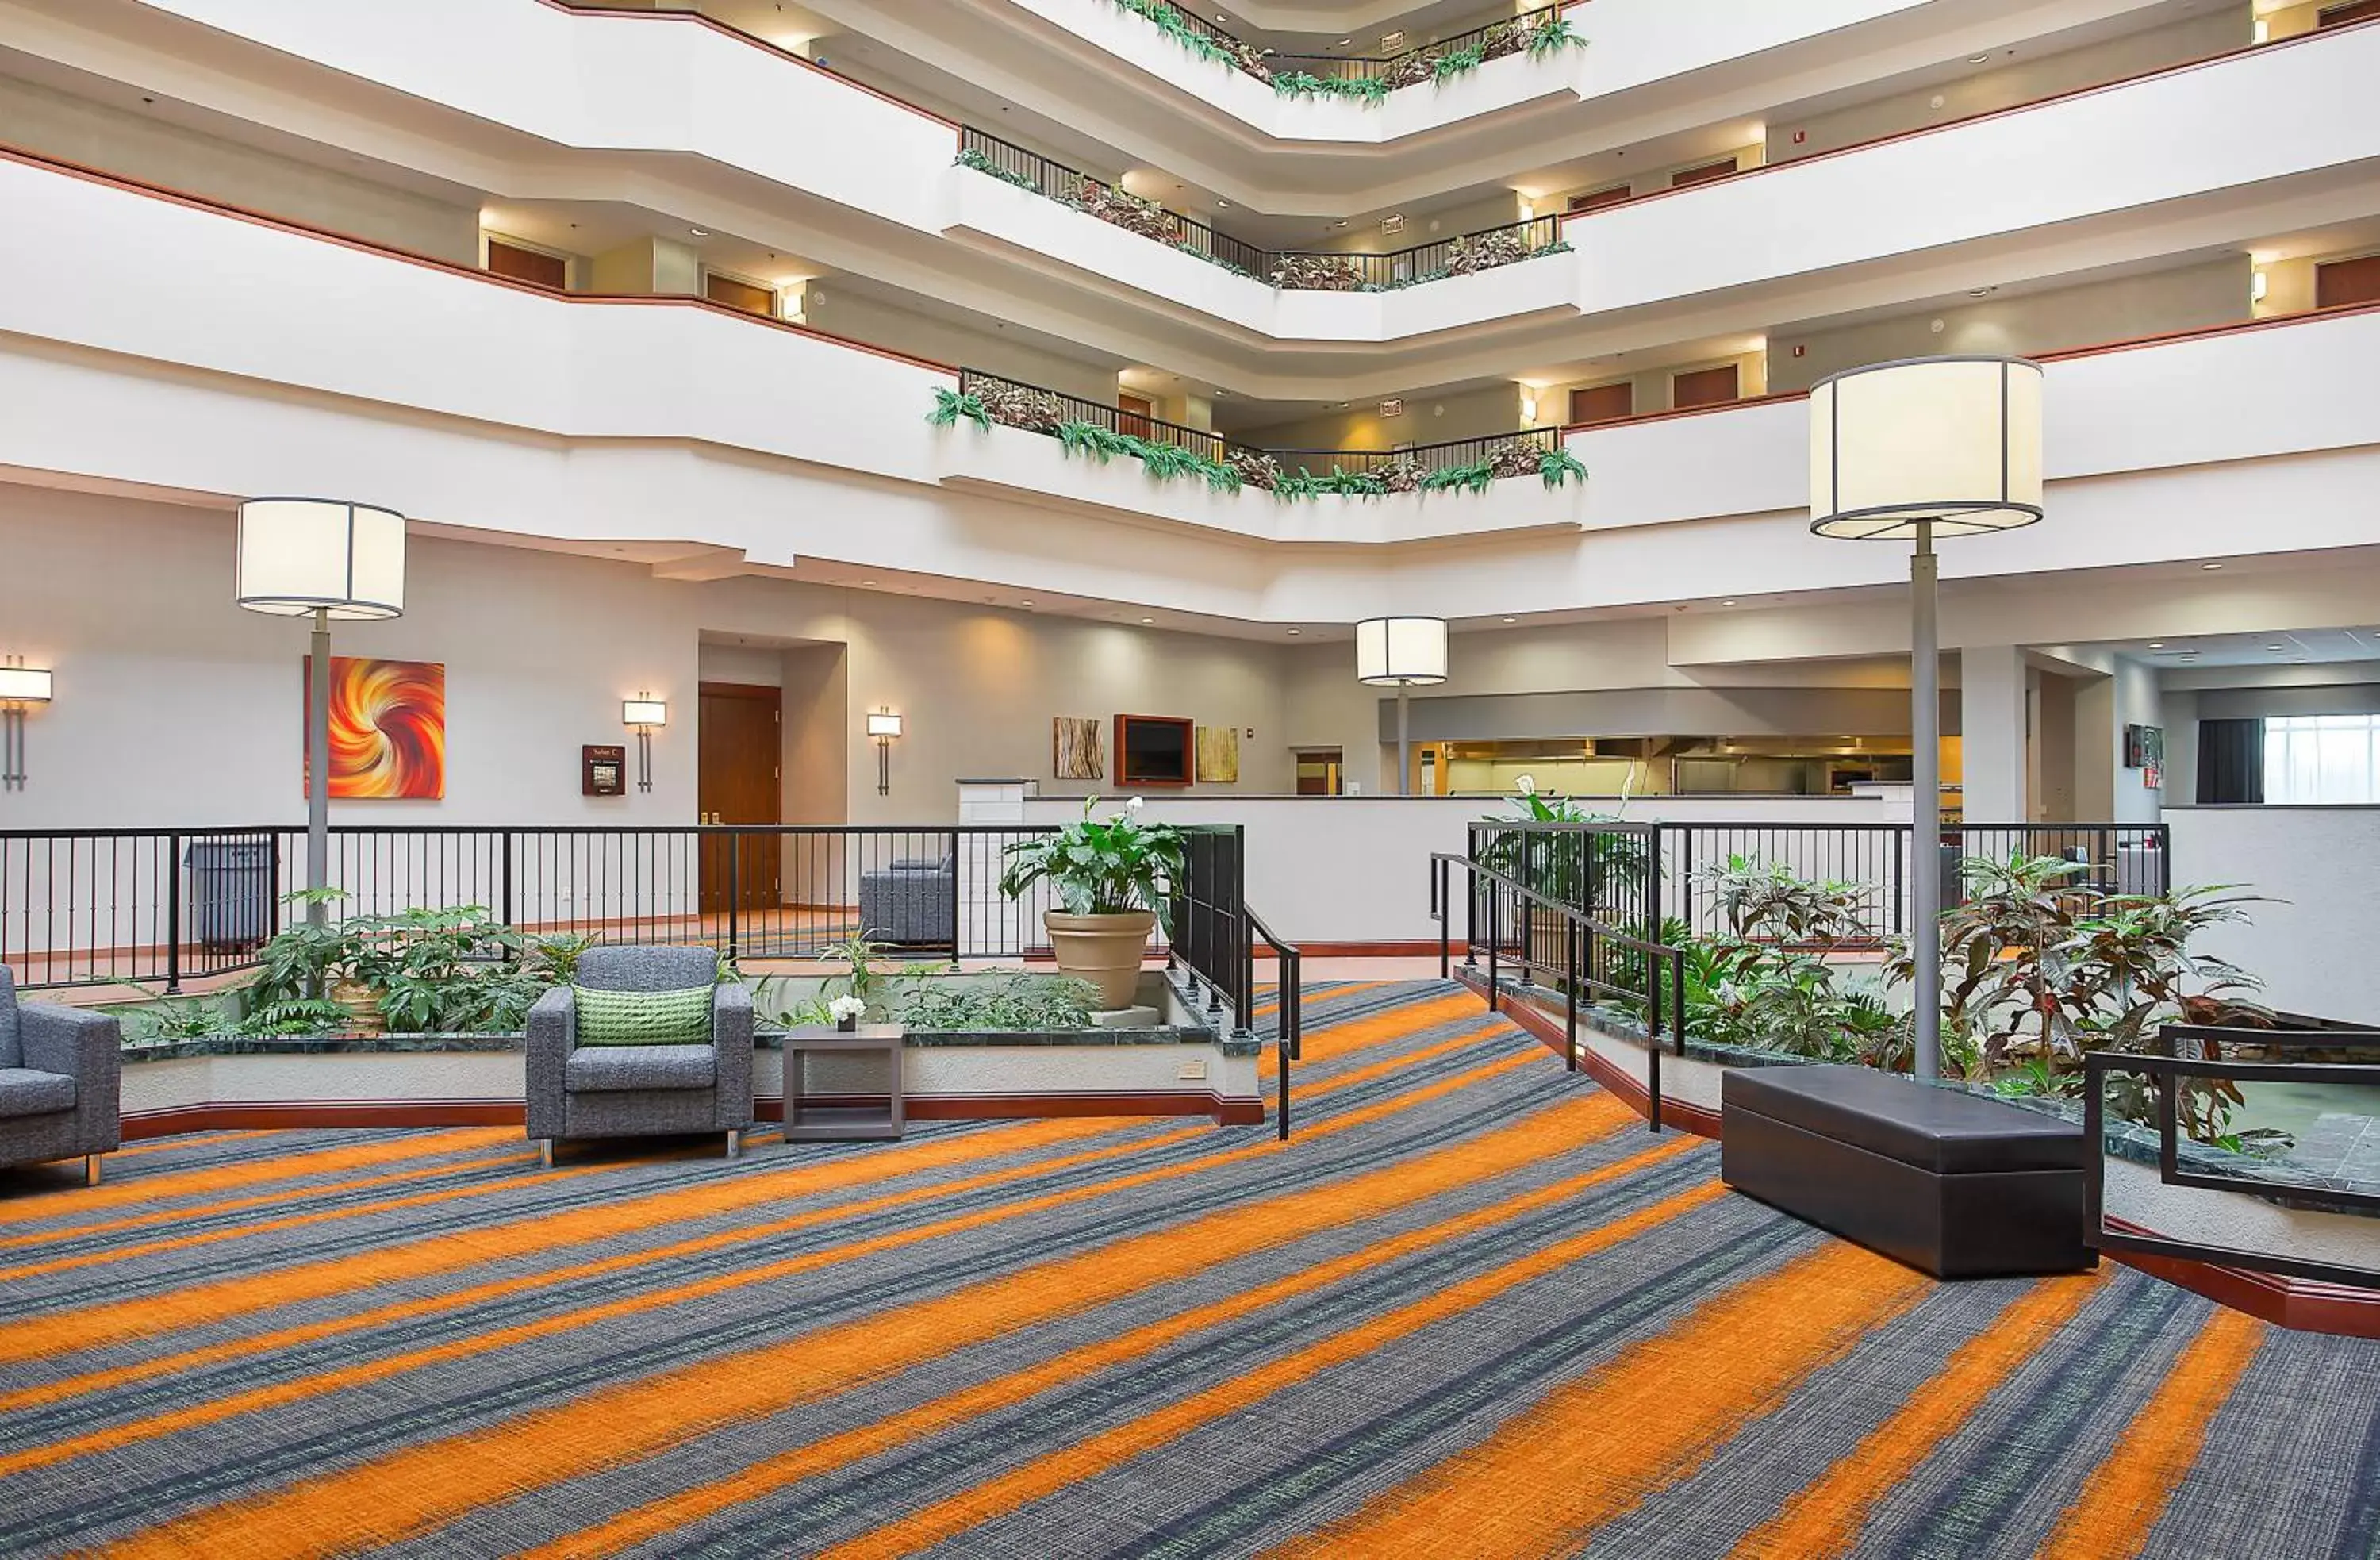 Property building in Holiday Inn University Plaza-Bowling Green, an IHG Hotel